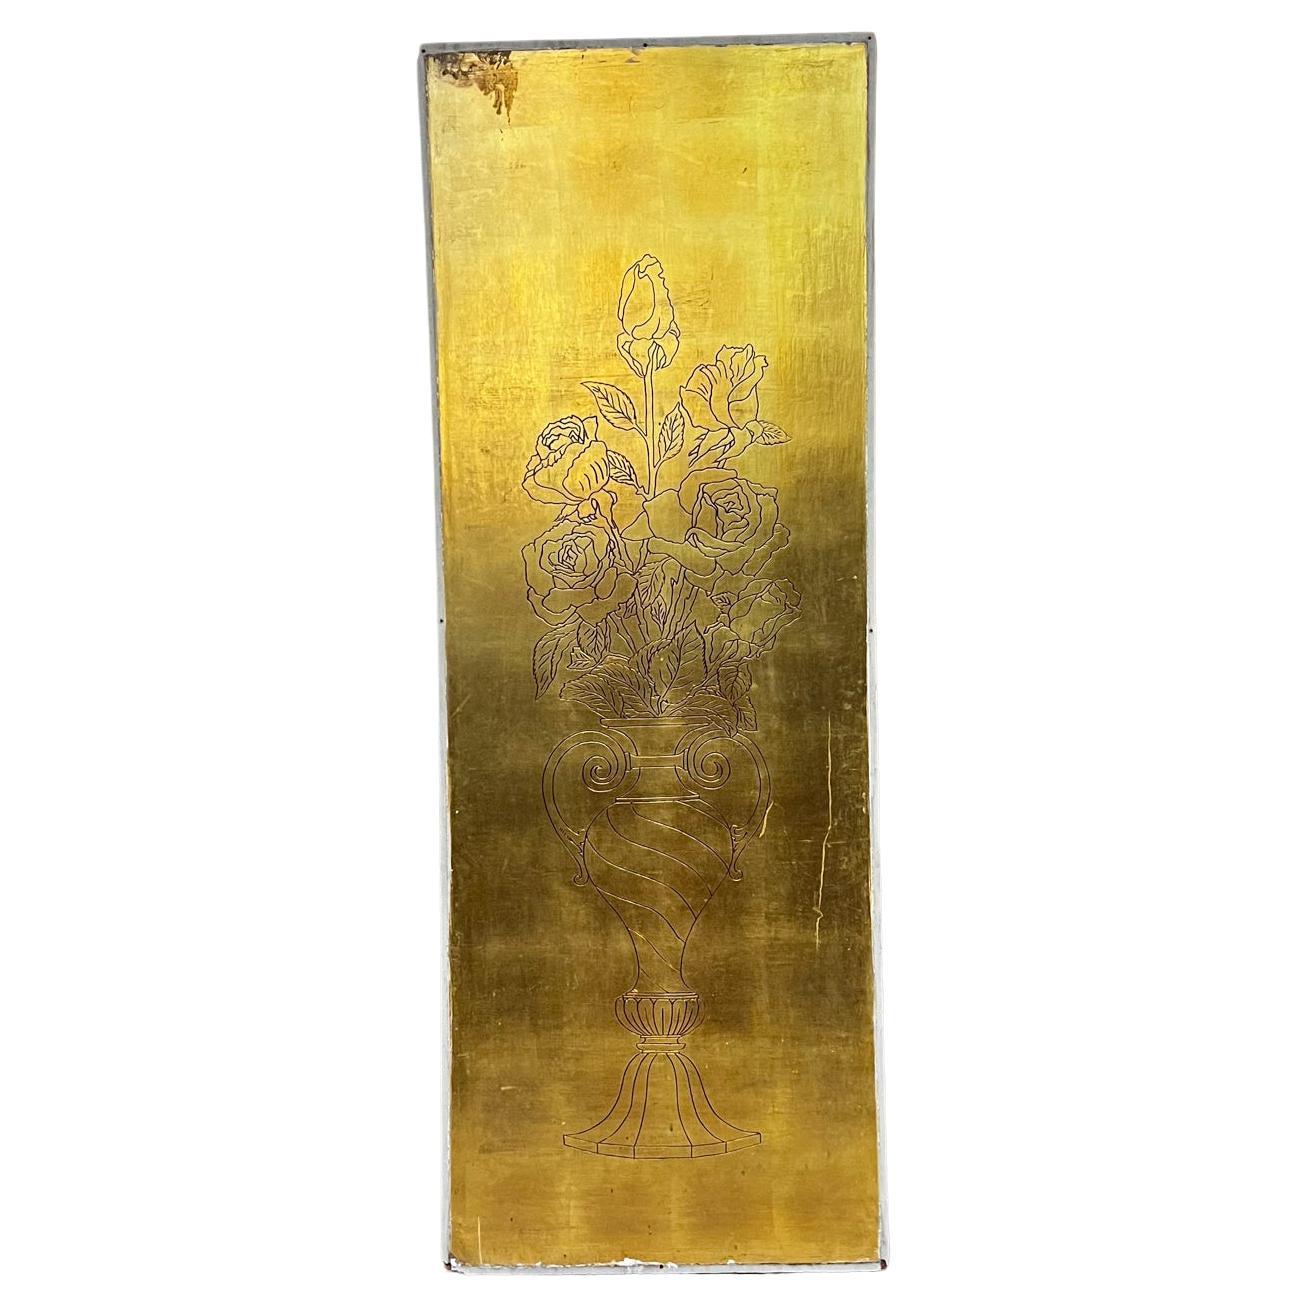 Double Sided Wood Door Panel in Gold Leaf Mexico 1960s
Unmarked after Arturo Pani.
Flower decoration on both sides. 
70.5 h x 25.75 w x .25 thick 
Original unrestored vintage condition. 
It appears panel was inside of a door frame.
Acquired in